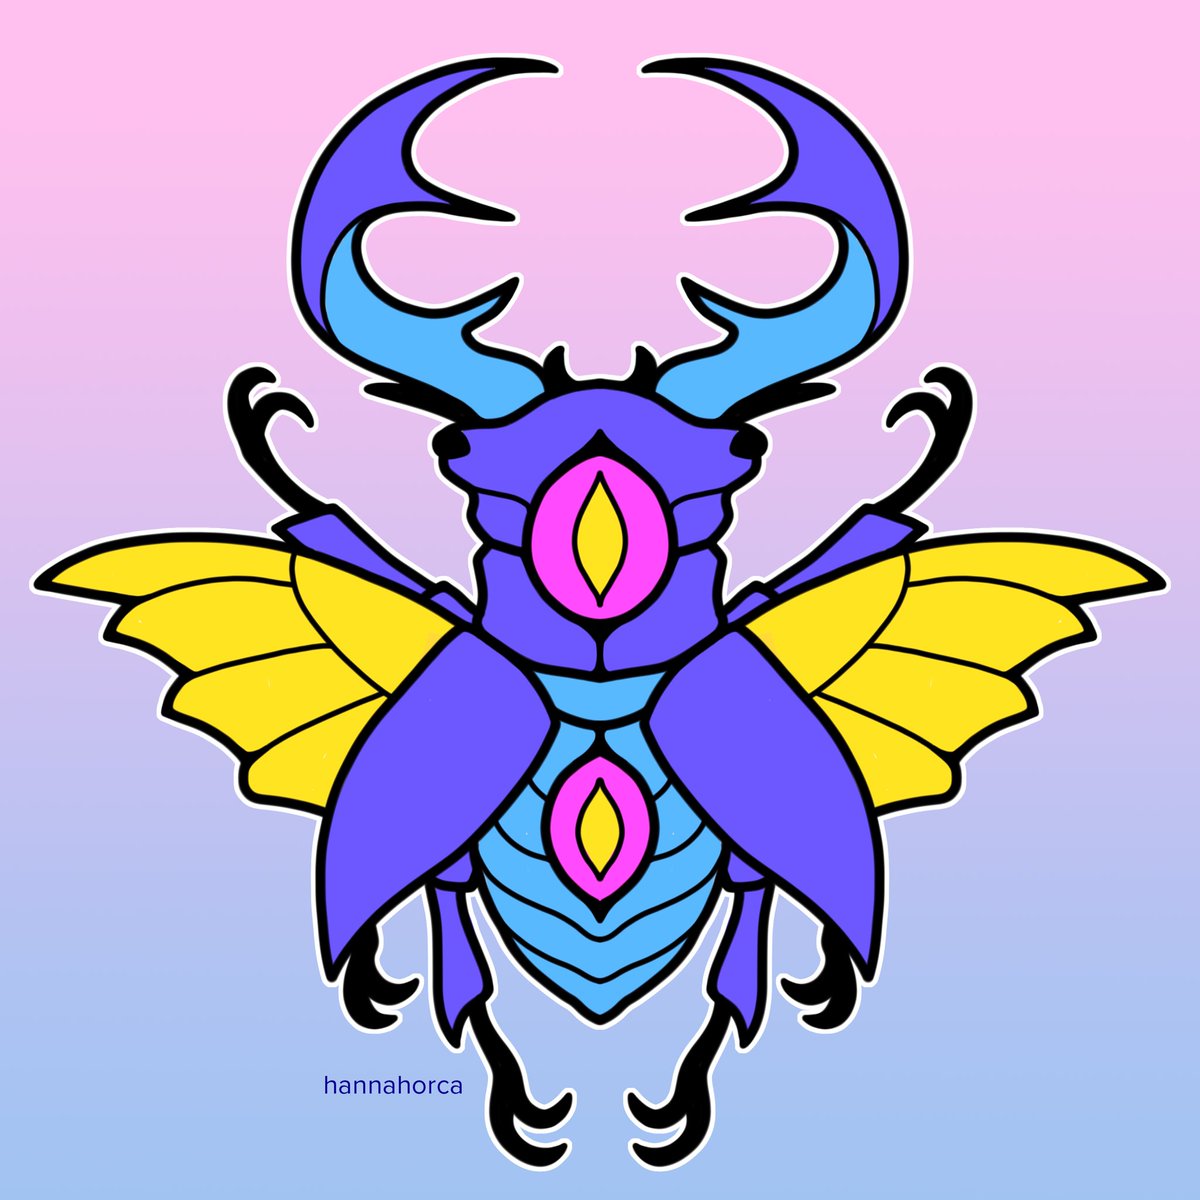 「The stag beetle pin is unlocked! On our 」|Hannah Comstockのイラスト